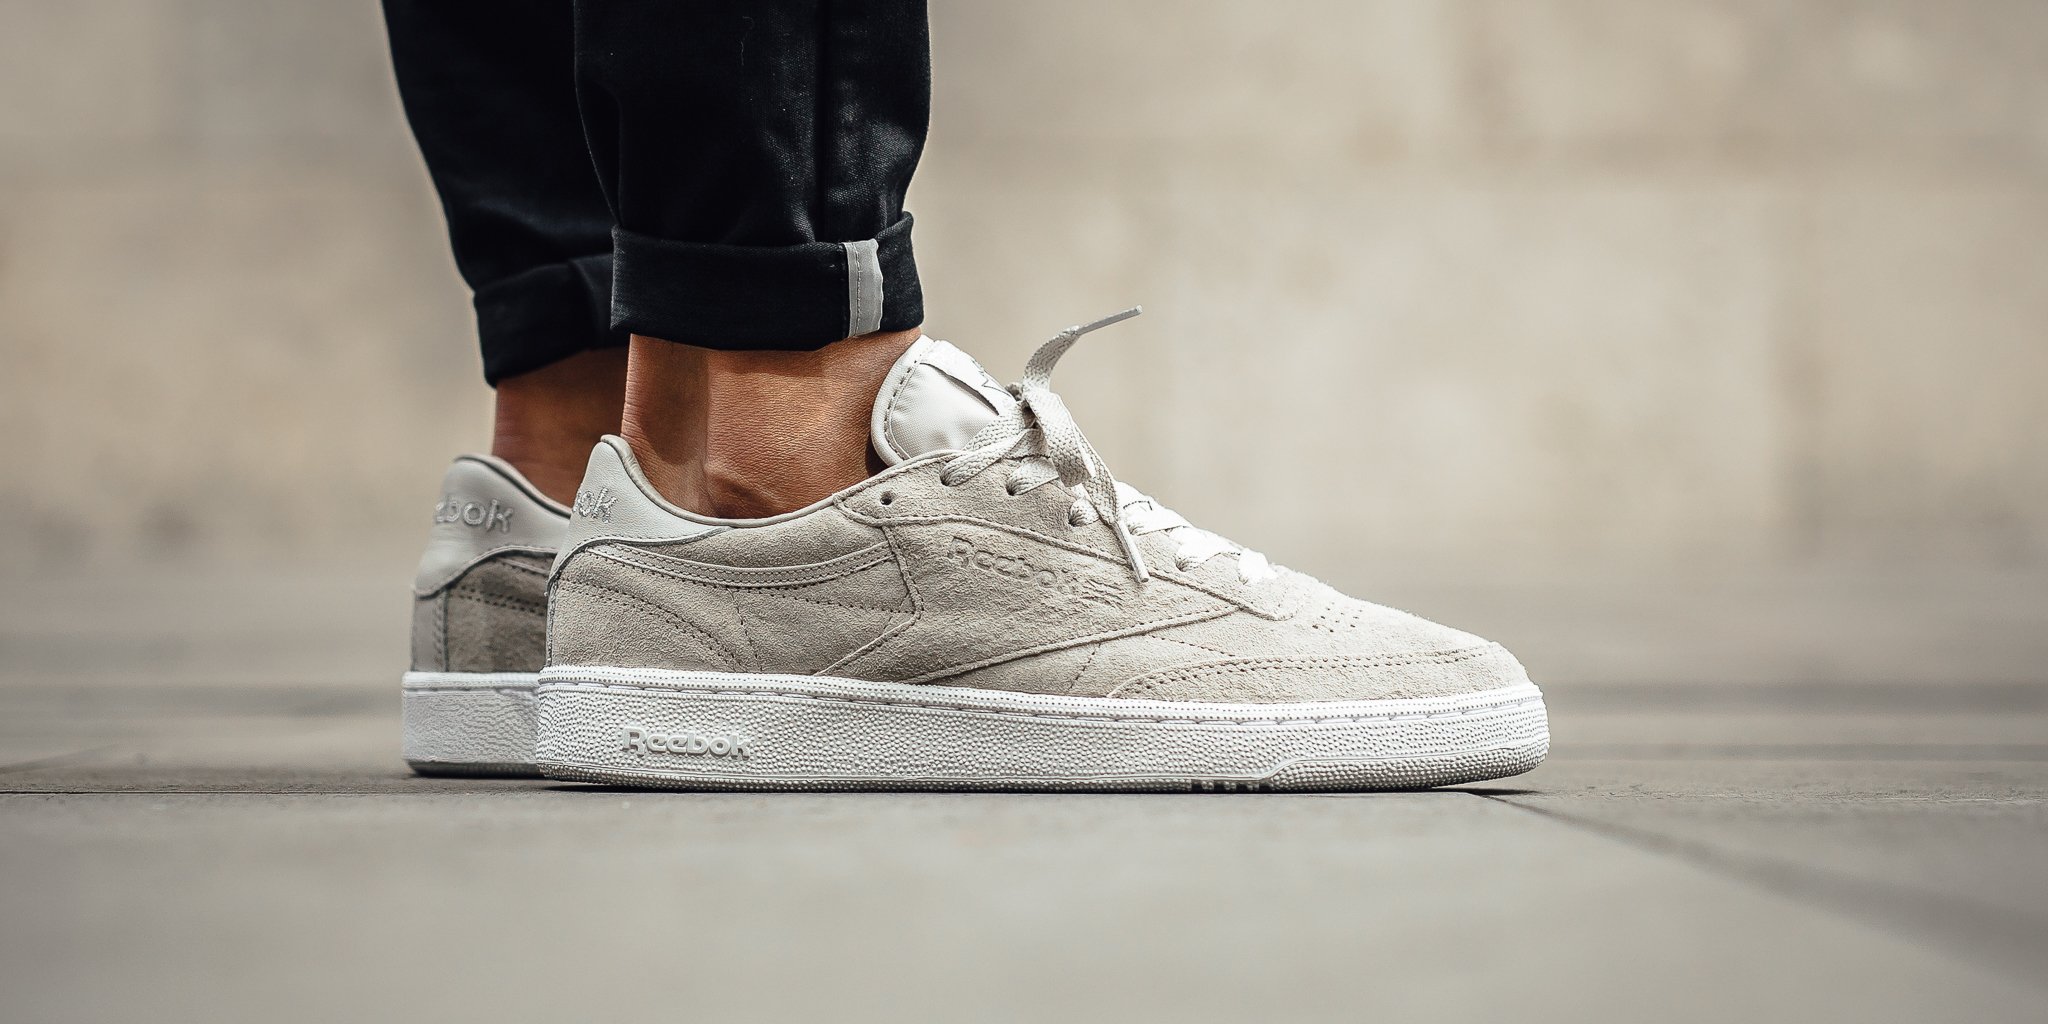 Incidente, evento Víspera domesticar Titolo on Twitter: "NEW IN! Beauty &amp; Youth X Reebok Club C 85 AFF -  Sandstone/Silver/White SHOP HERE: https://t.co/RVtLs9uRvA  https://t.co/KSFz2aCvZr" / Twitter